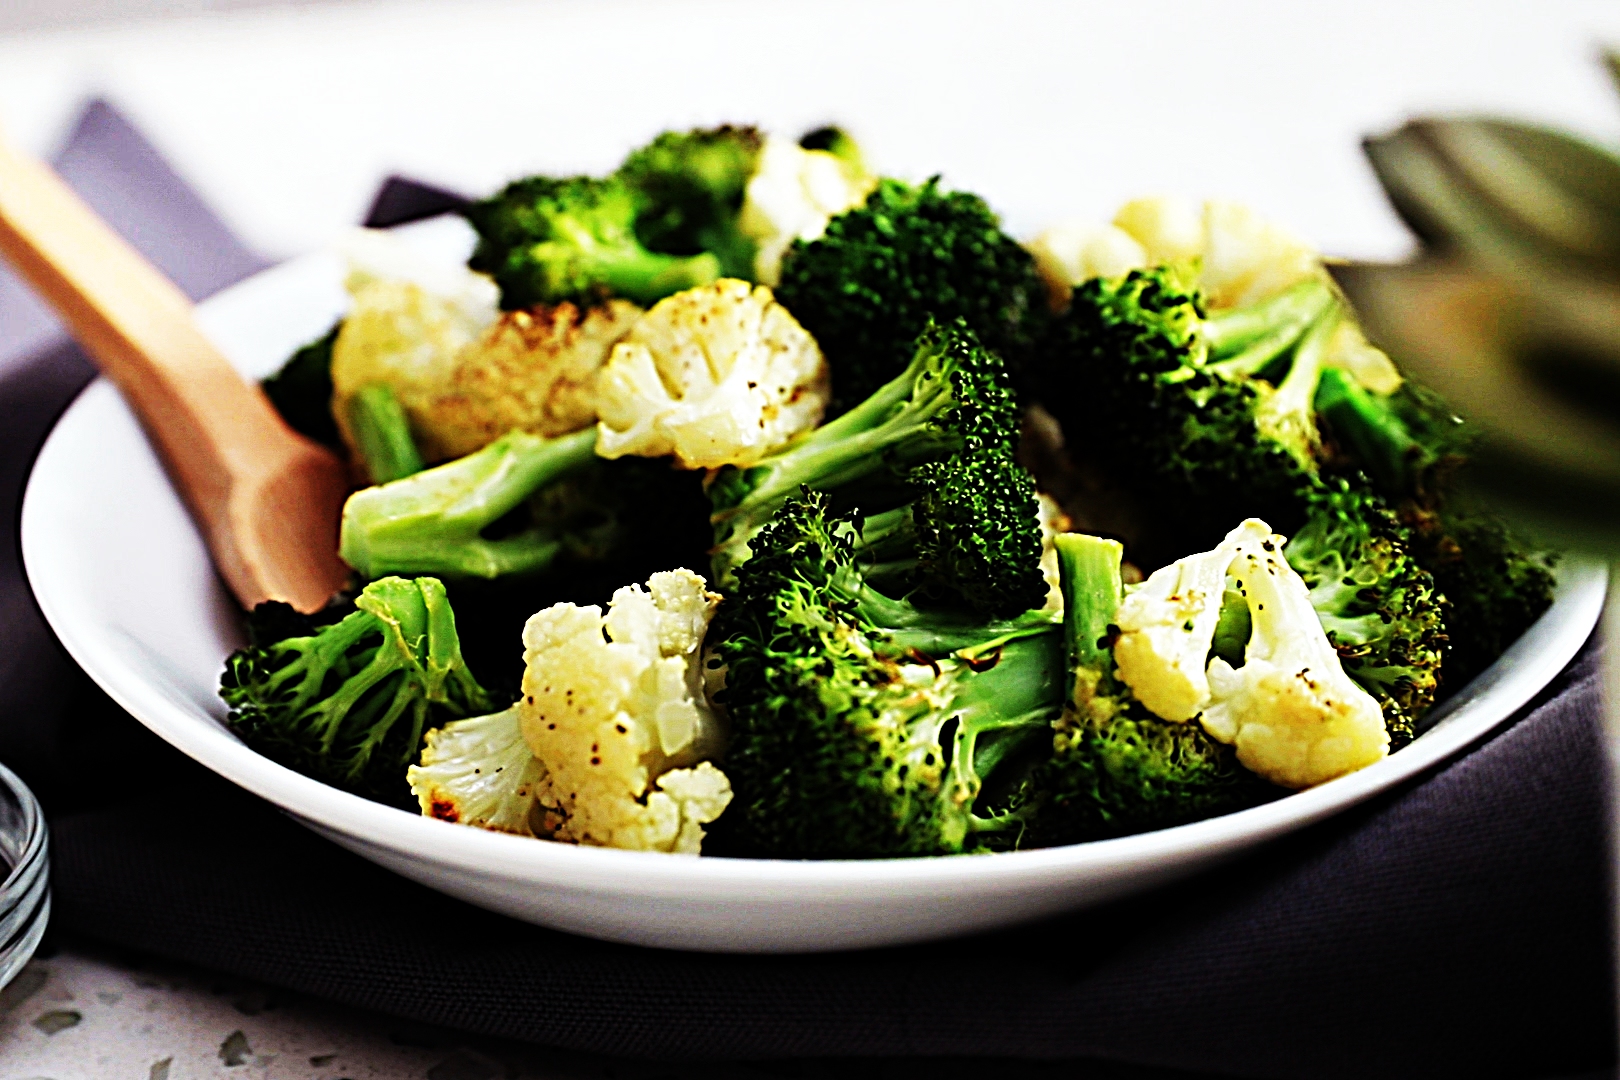 Stupid-Easy Recipe for Roasted Broccoli and Cauliflower (#1 Top-Rated)